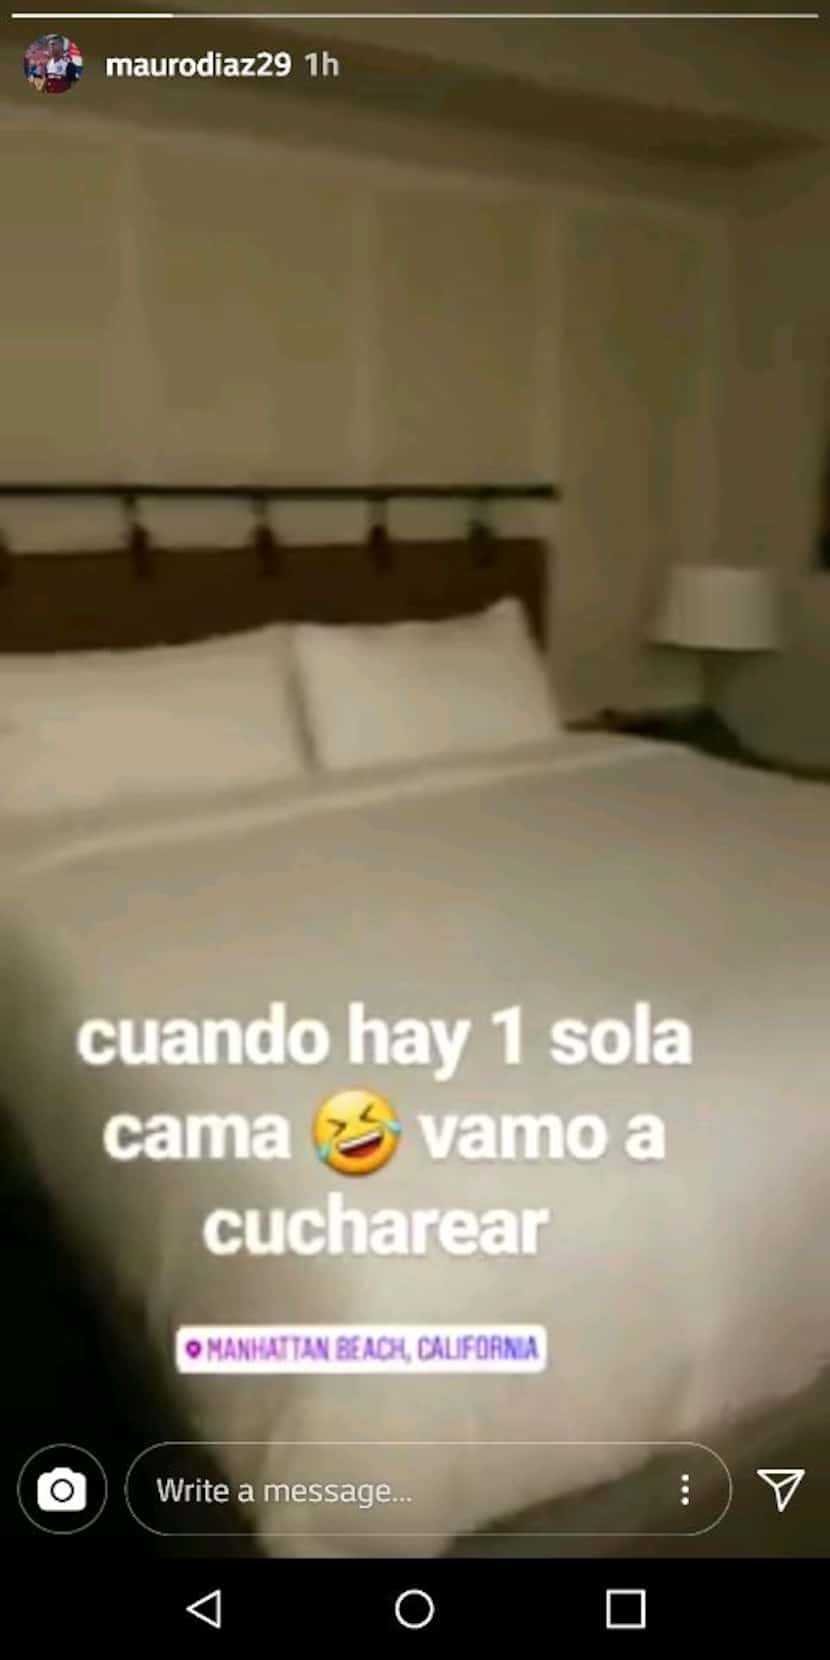 Mauro Diaz and Maxi Urruti find an unexpected surprise in their hotel on Tuesday, May 29...